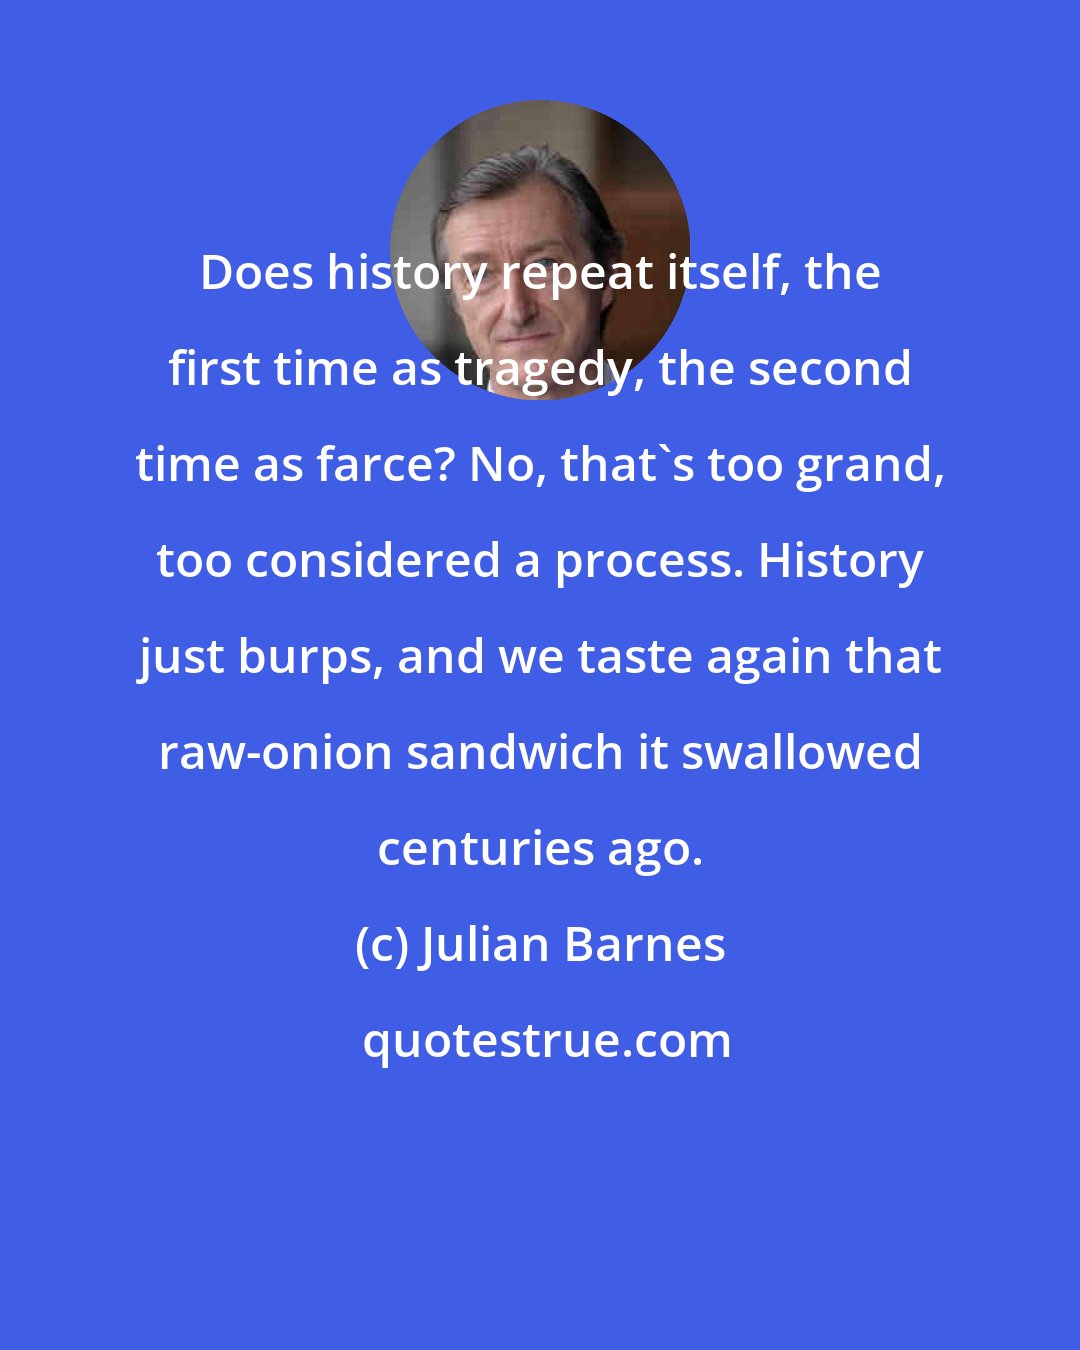 Julian Barnes: Does history repeat itself, the first time as tragedy, the second time as farce? No, that's too grand, too considered a process. History just burps, and we taste again that raw-onion sandwich it swallowed centuries ago.